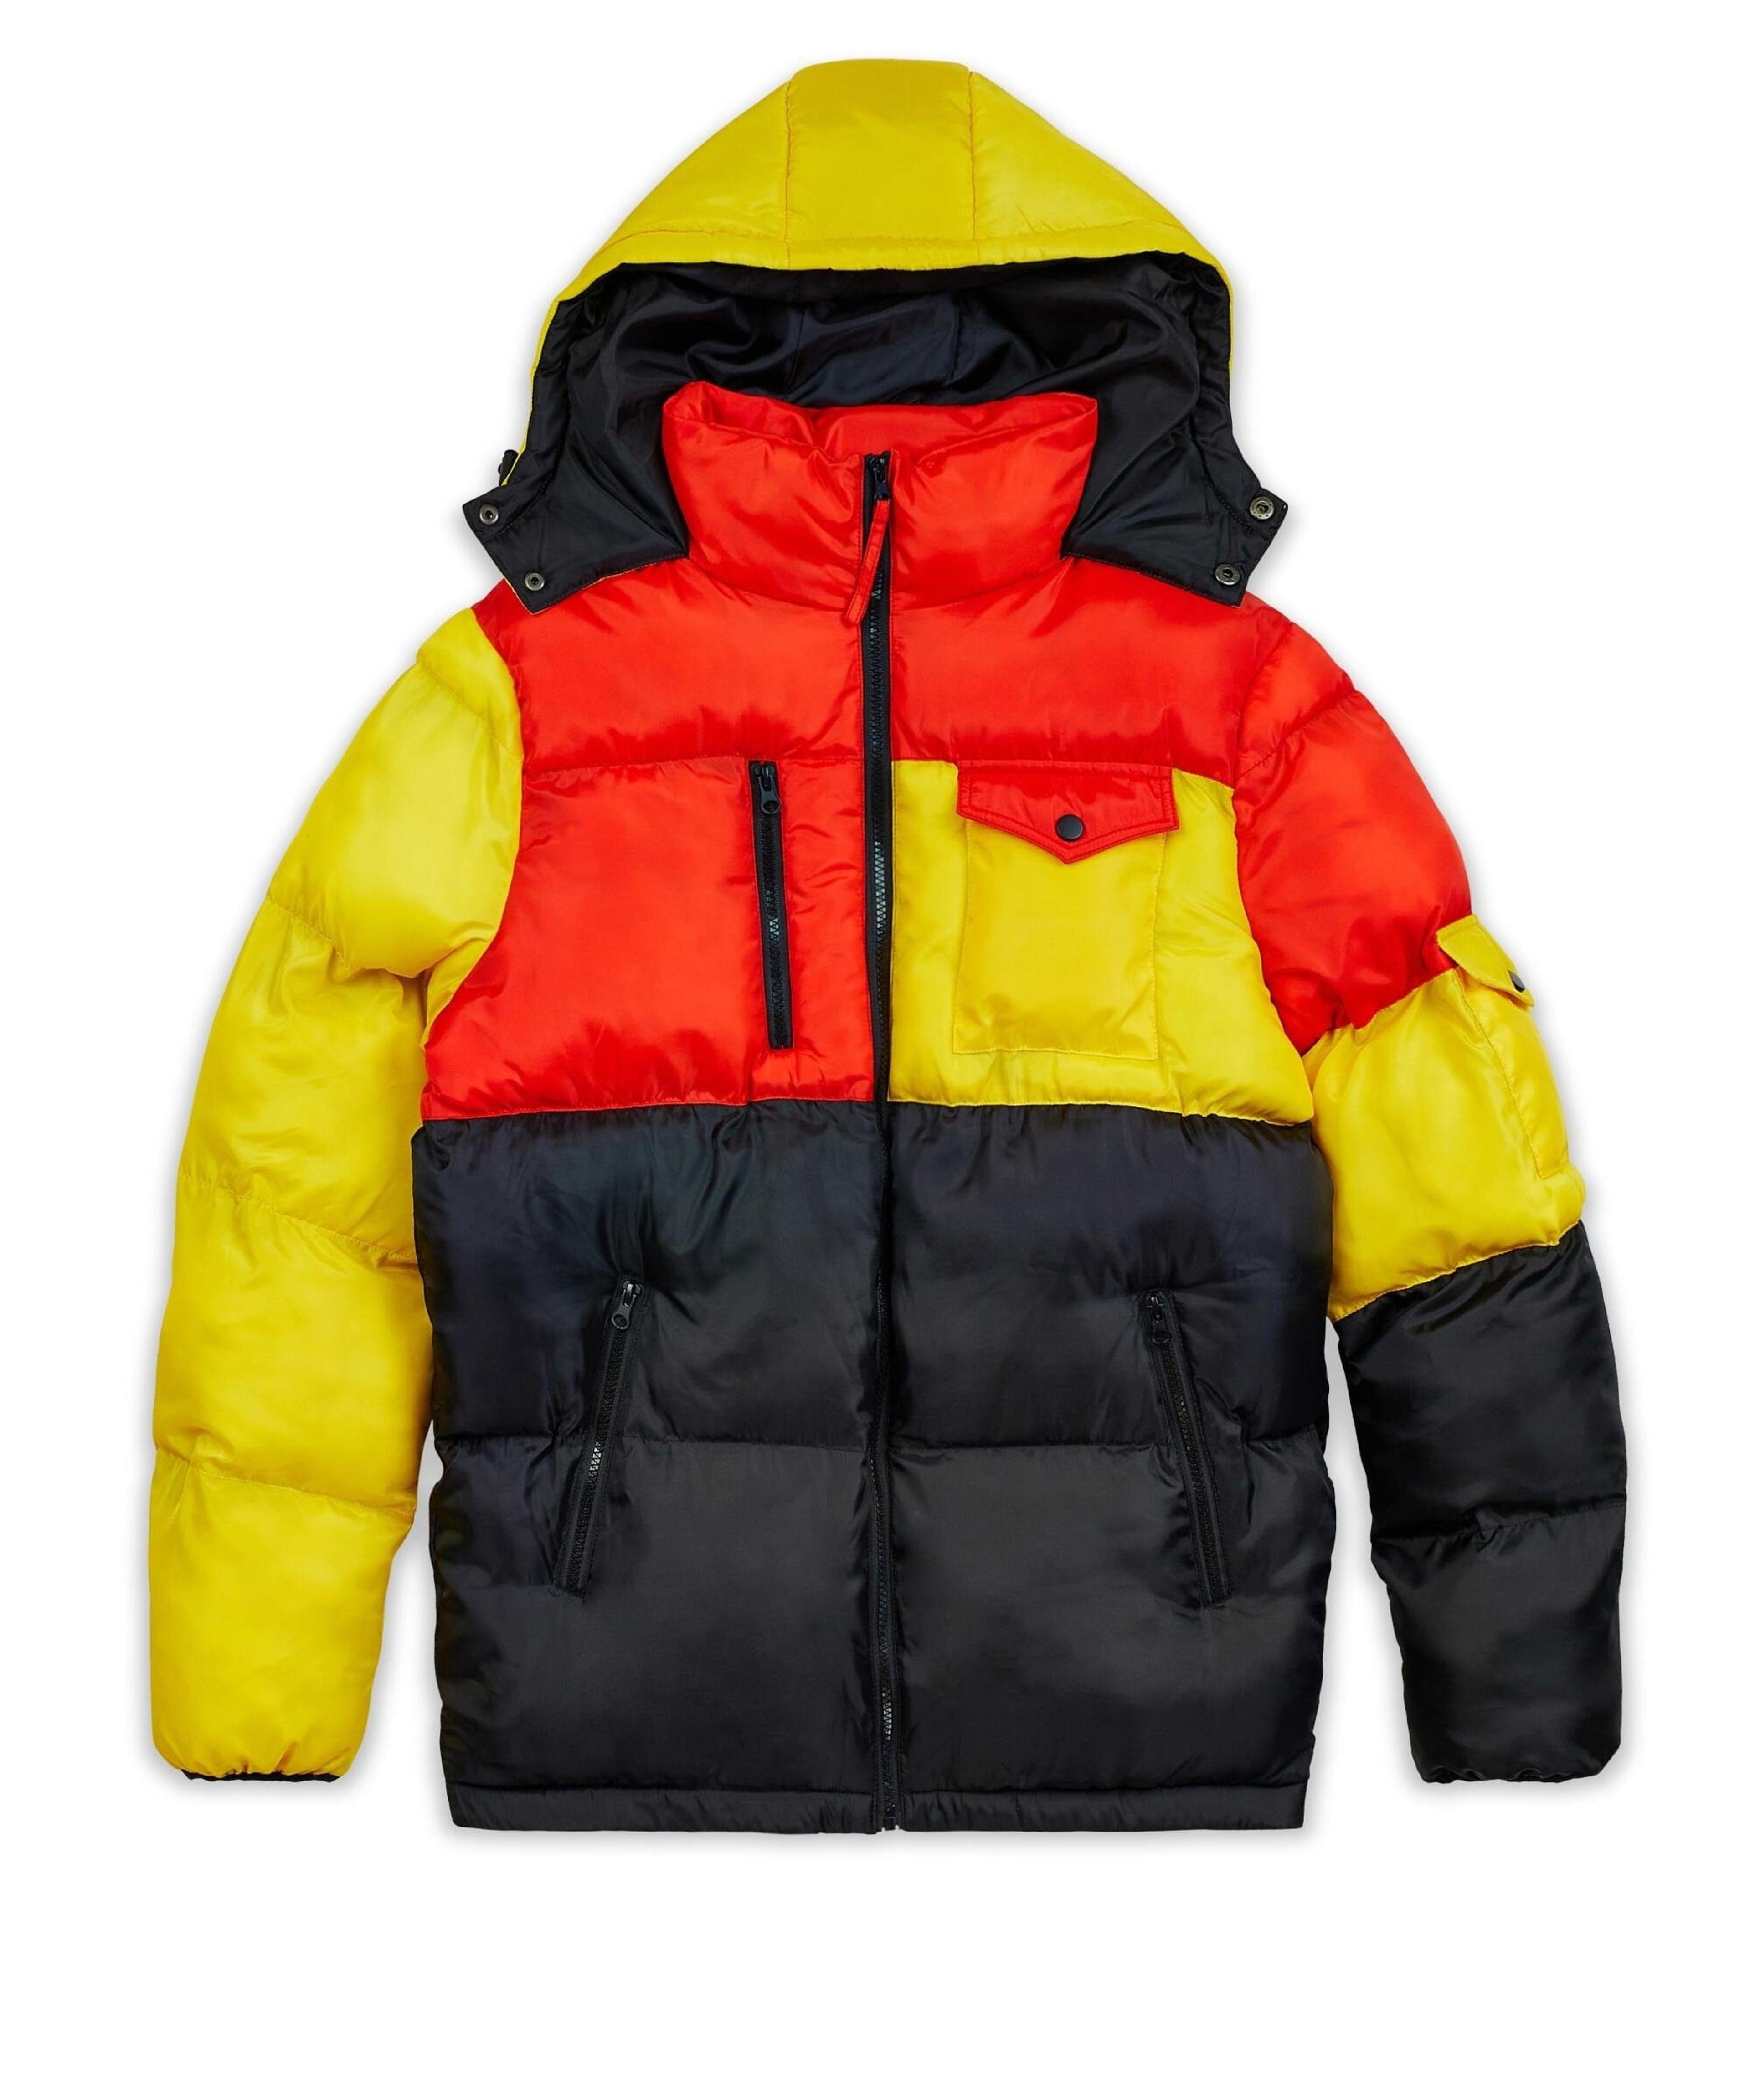 Alternate View 2 of Larry Color Block Hooded Puffer Jacket